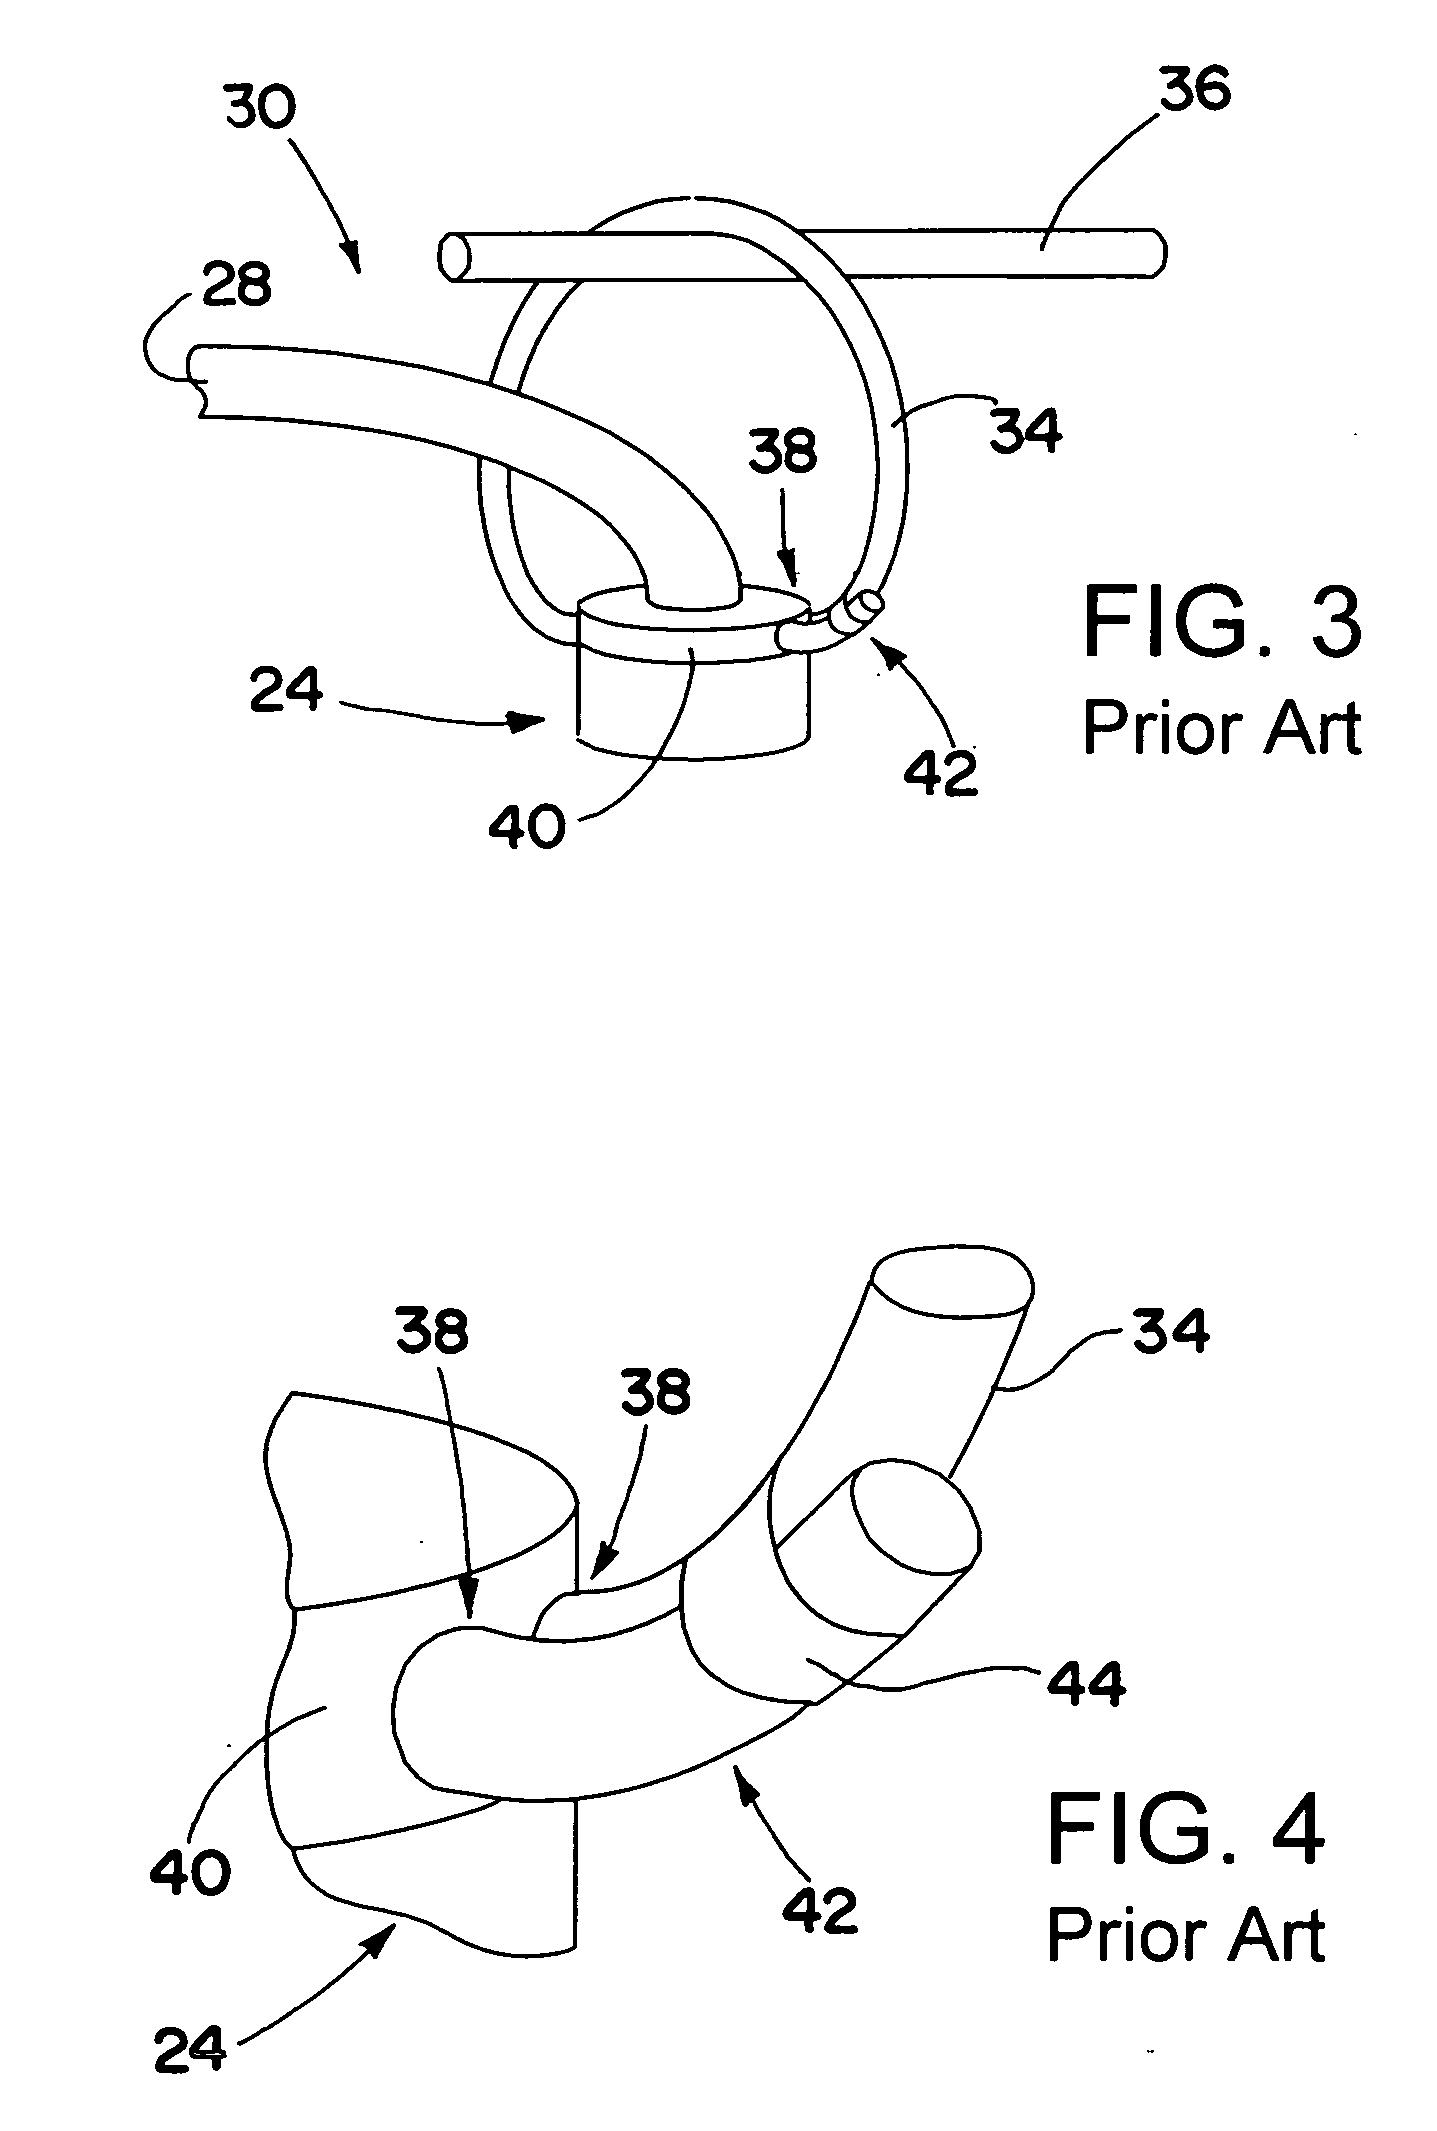 Weapon release cable retention device and method